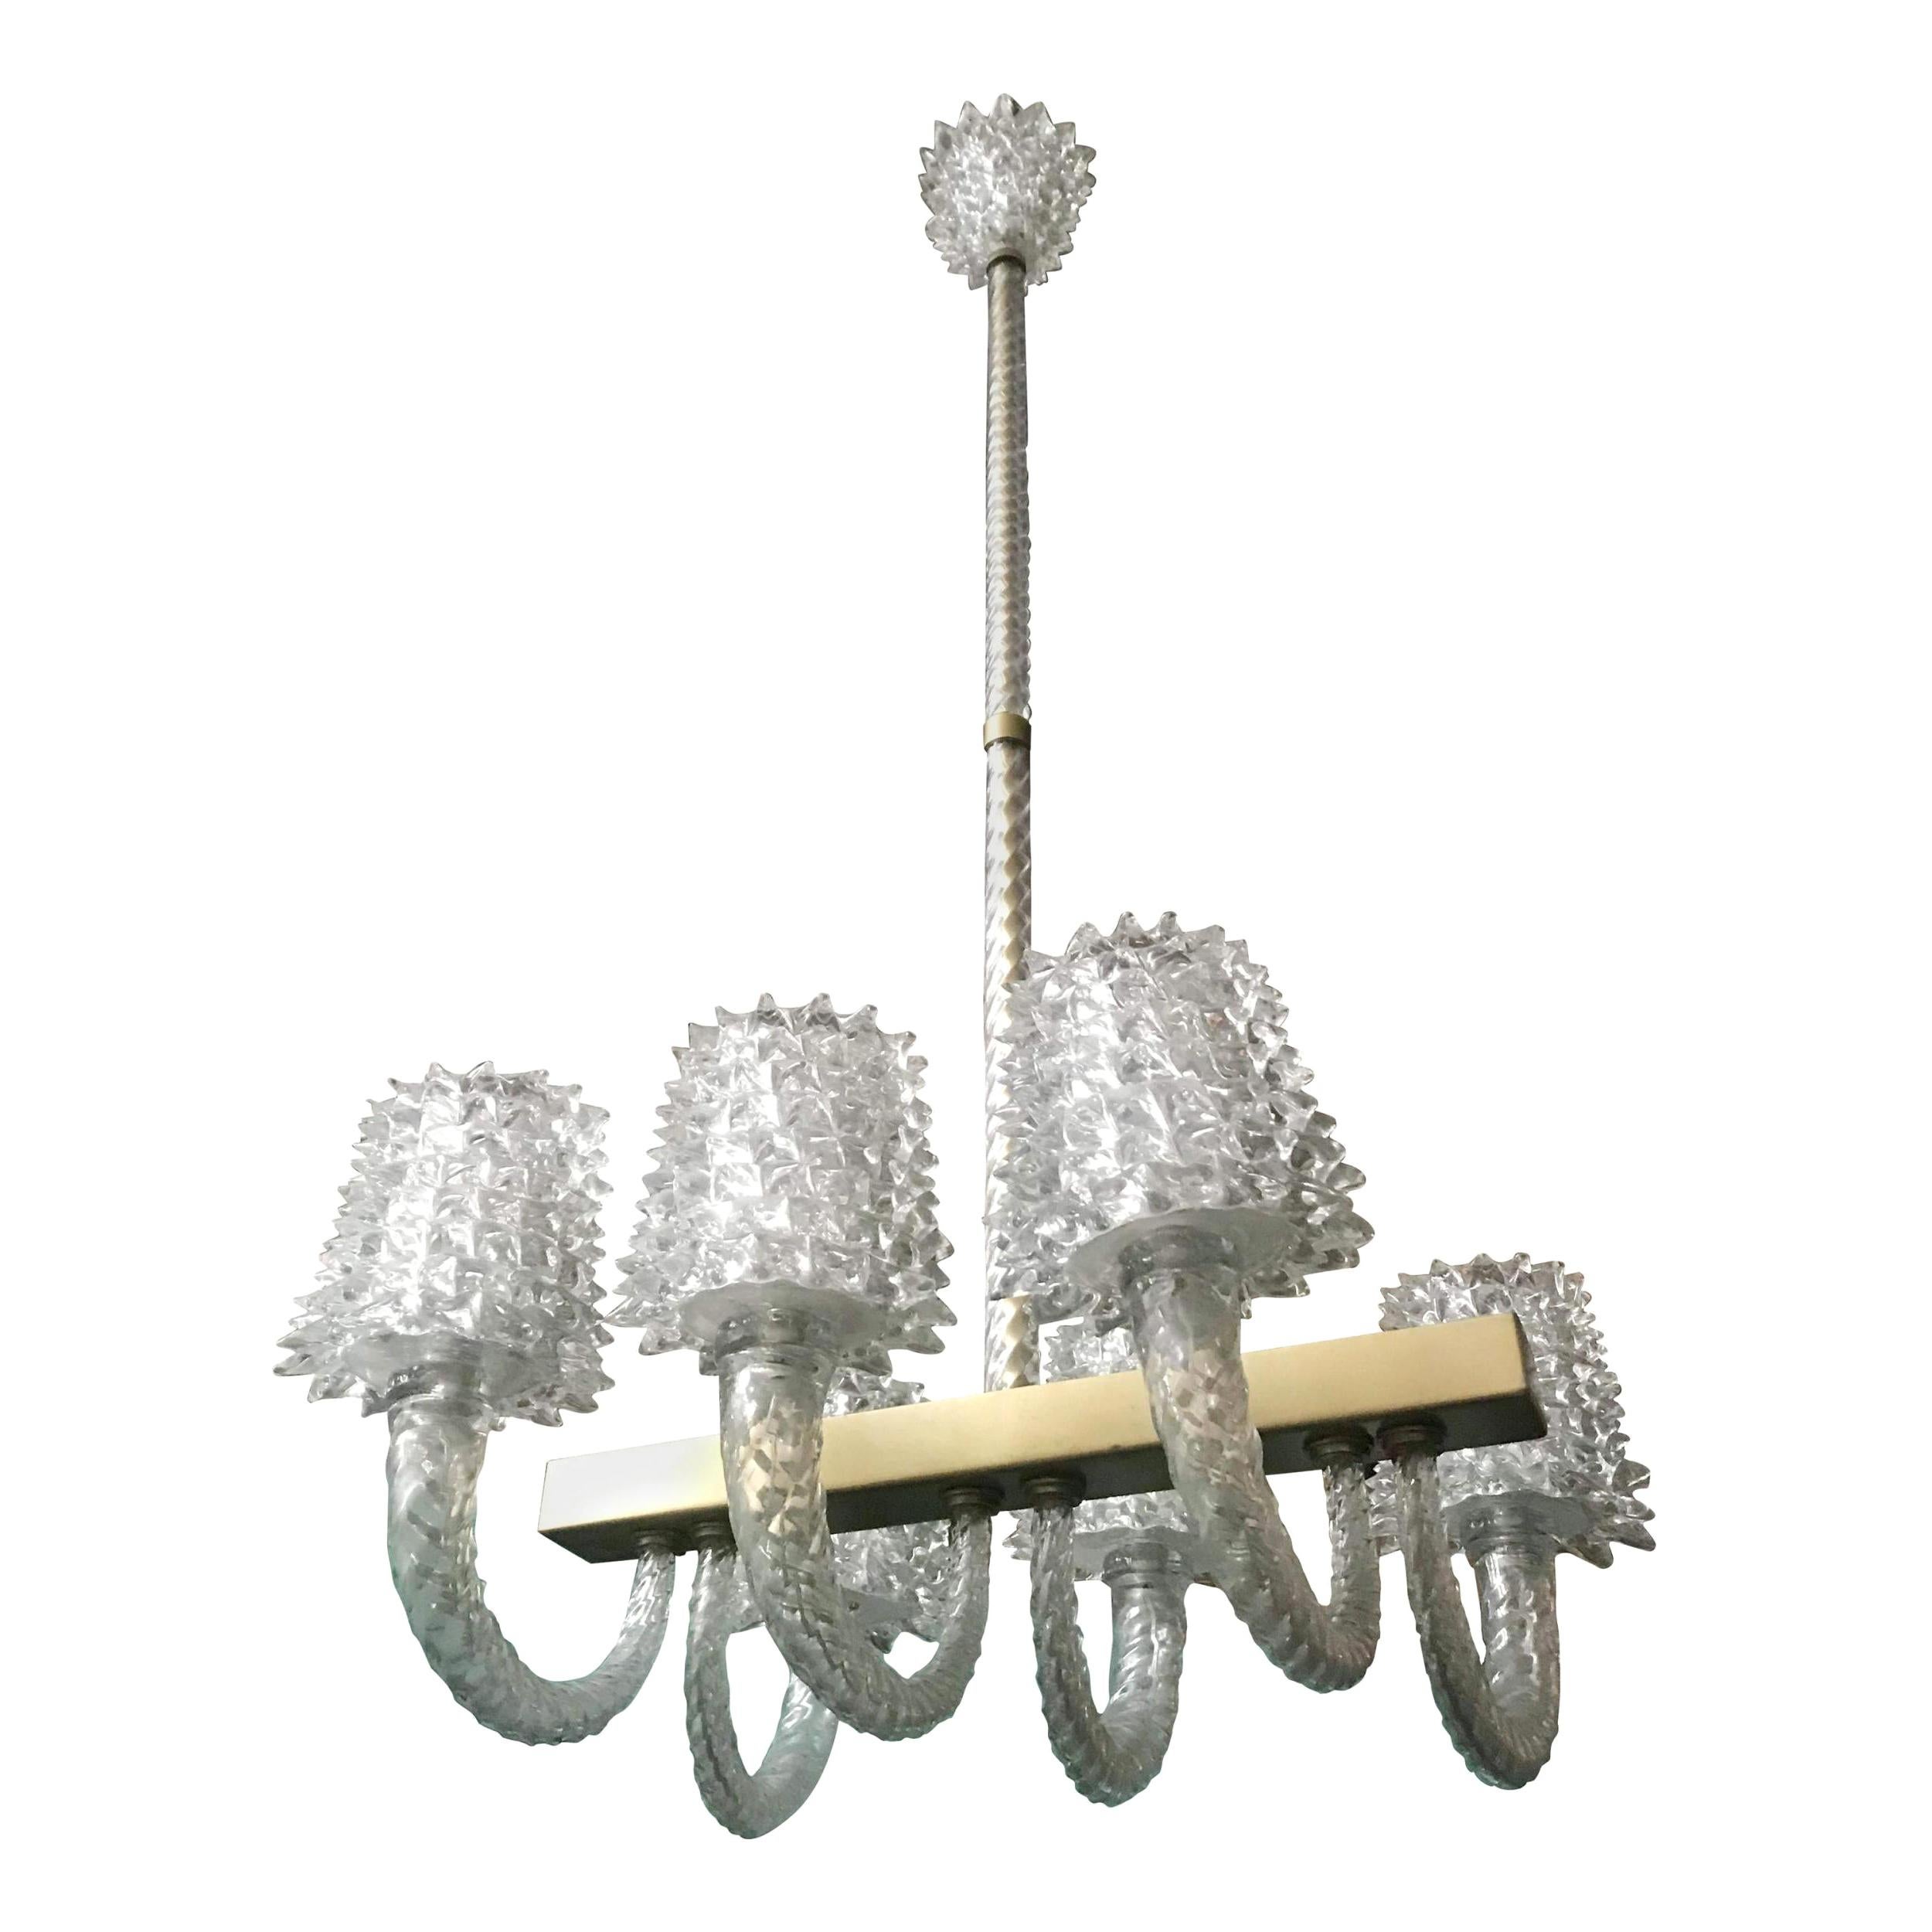 Vintage Murano Glass Chandelier w/ Rostrato Glass by Barovier e Toso, 1950s For Sale